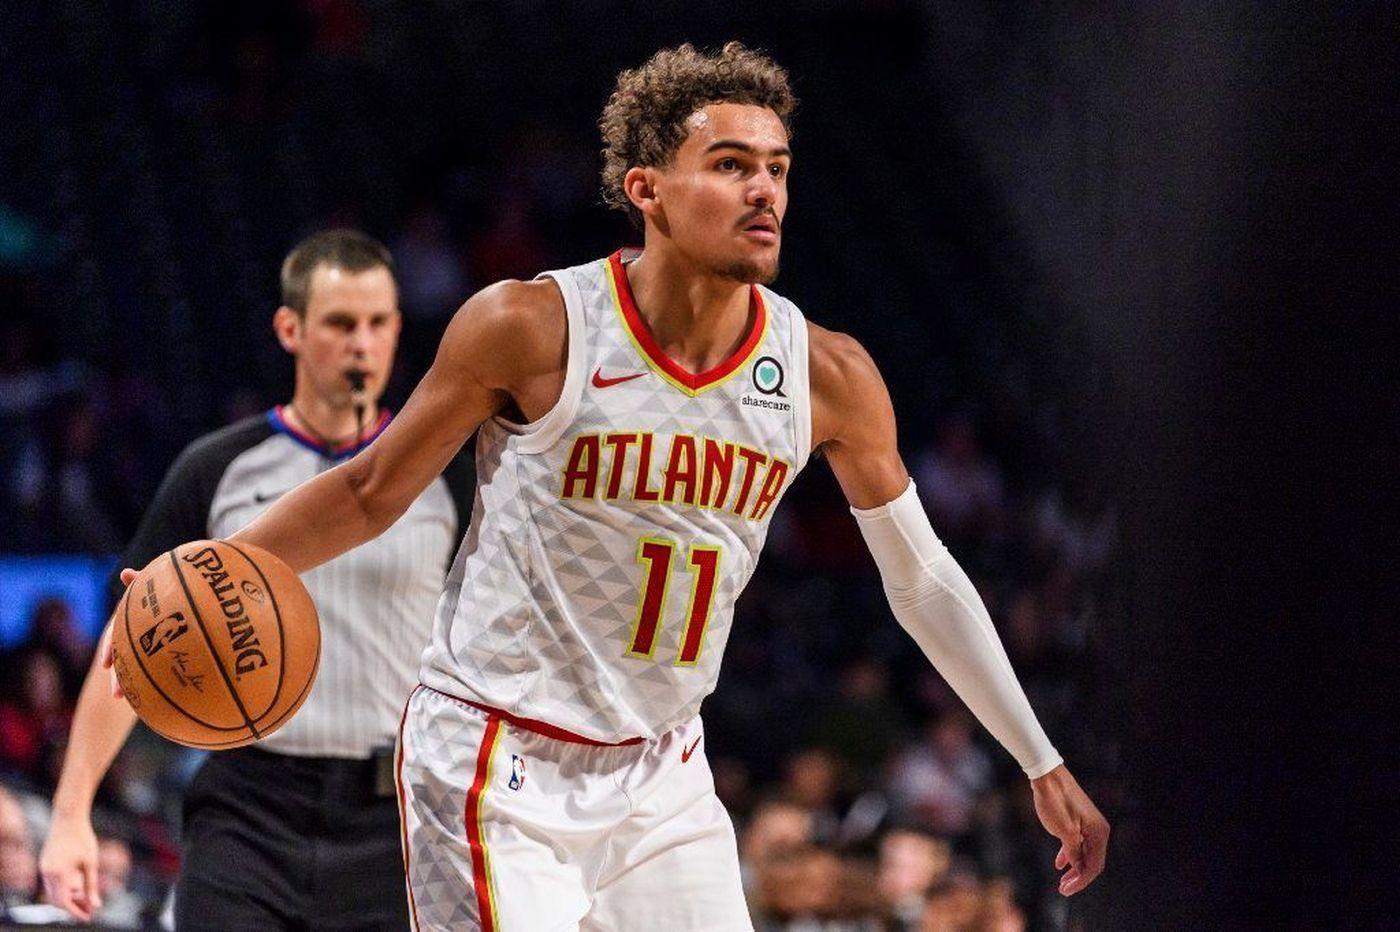 The Human Highlight Blog: What to expect from the Atlanta Hawks this